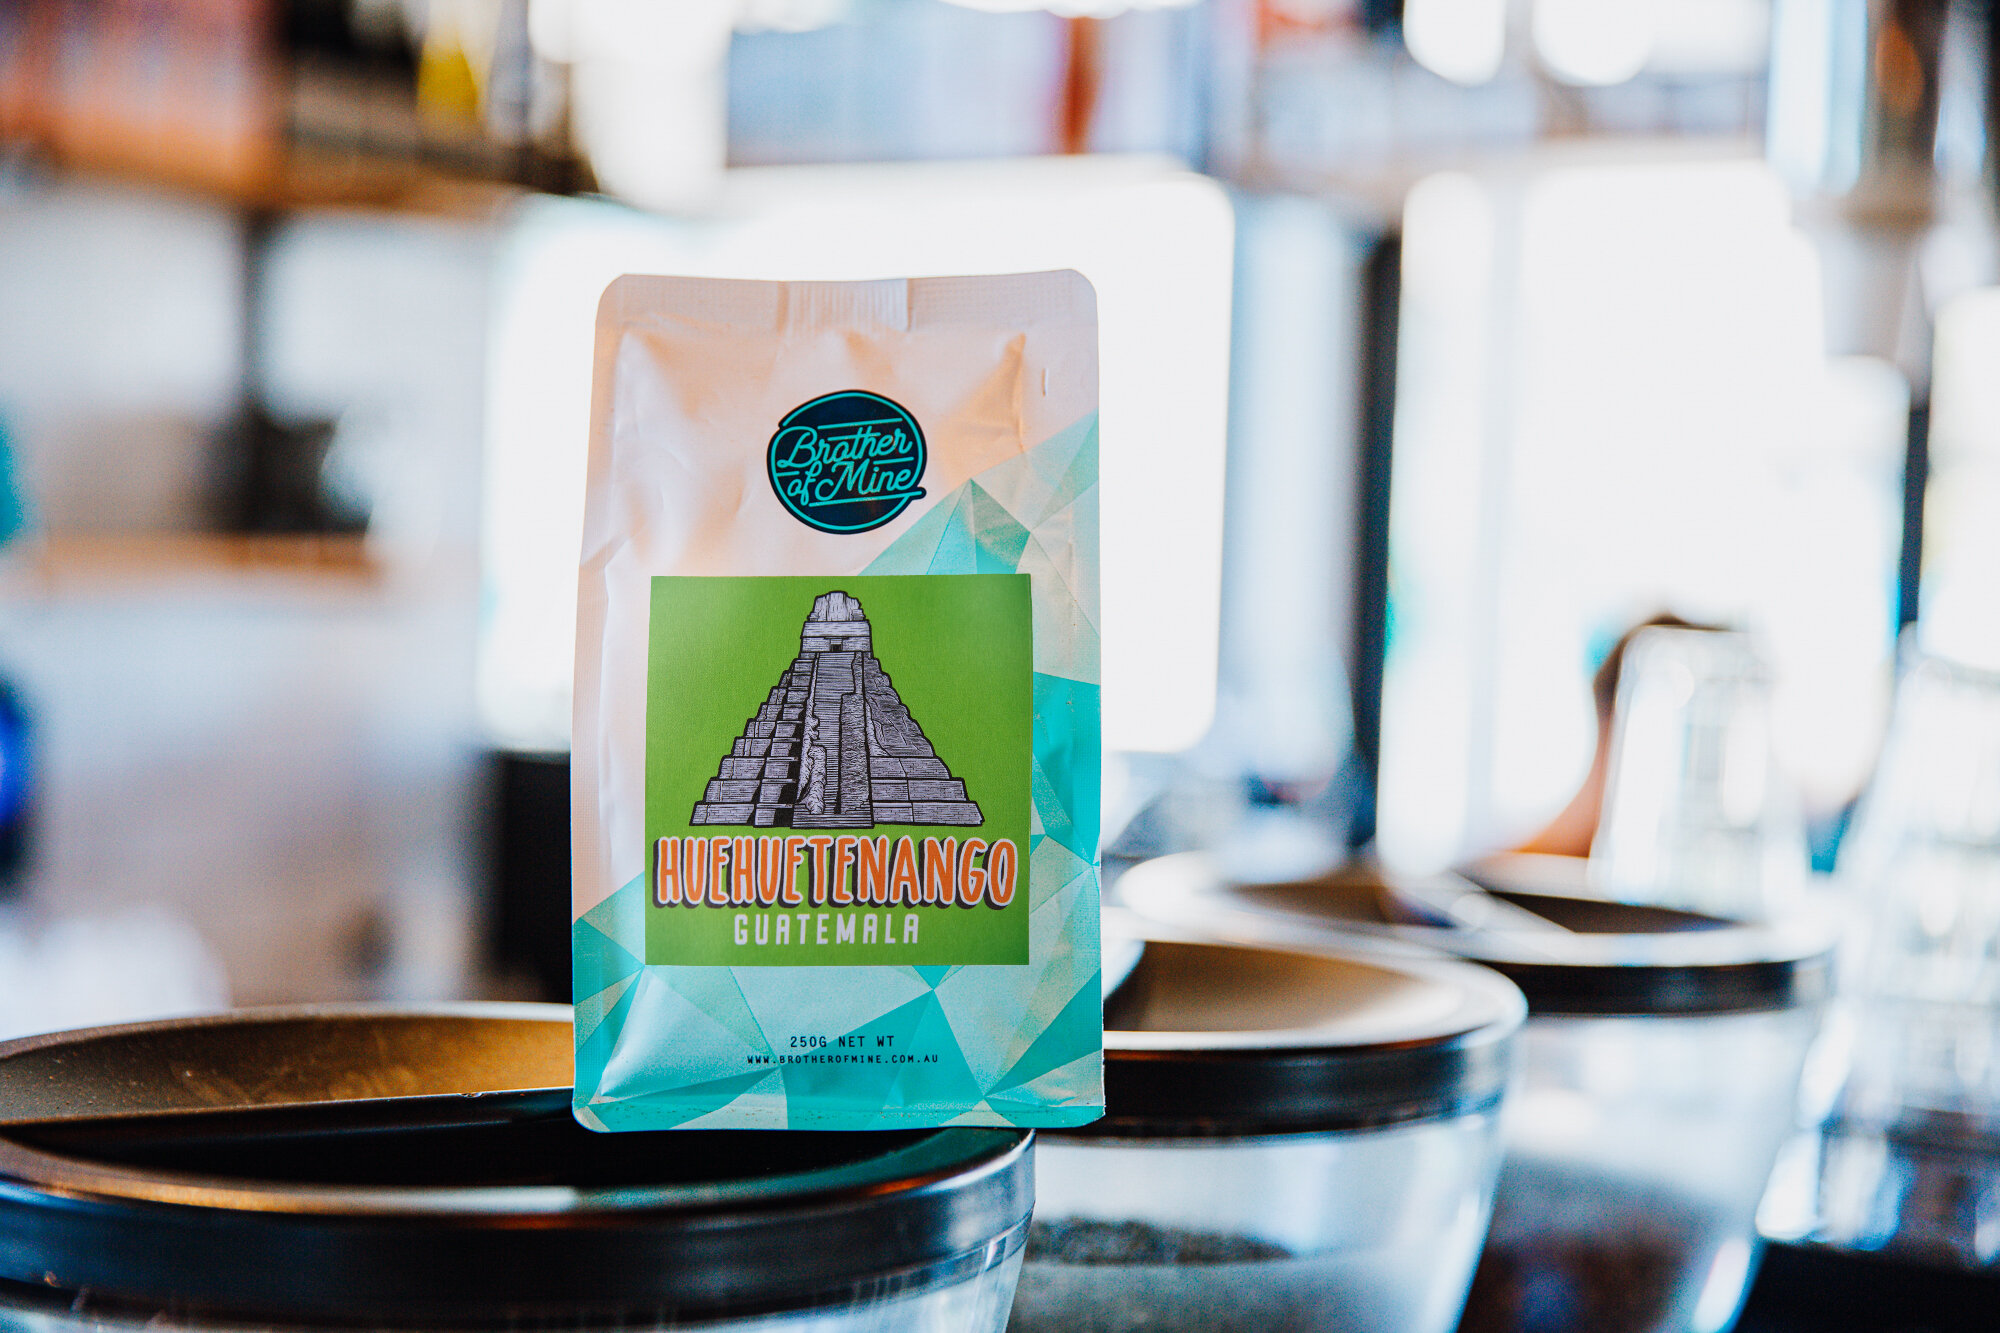 Huehuetenango, Guatemala - our featured filter roast for May 20220